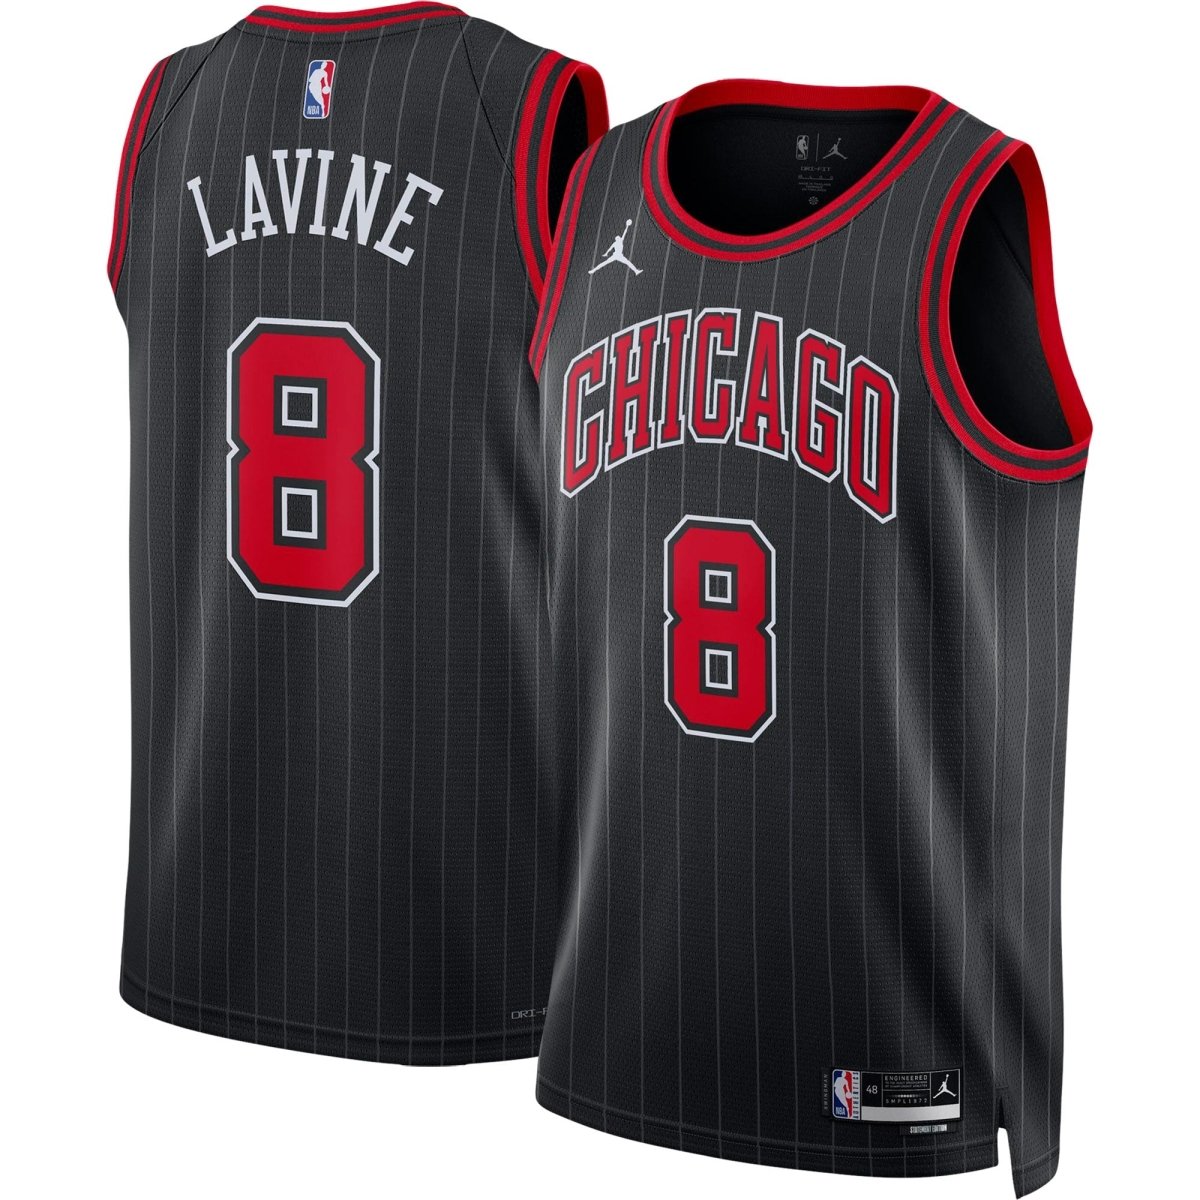 Authentic Zach Lavine Chicago Bulls City edition jersey review